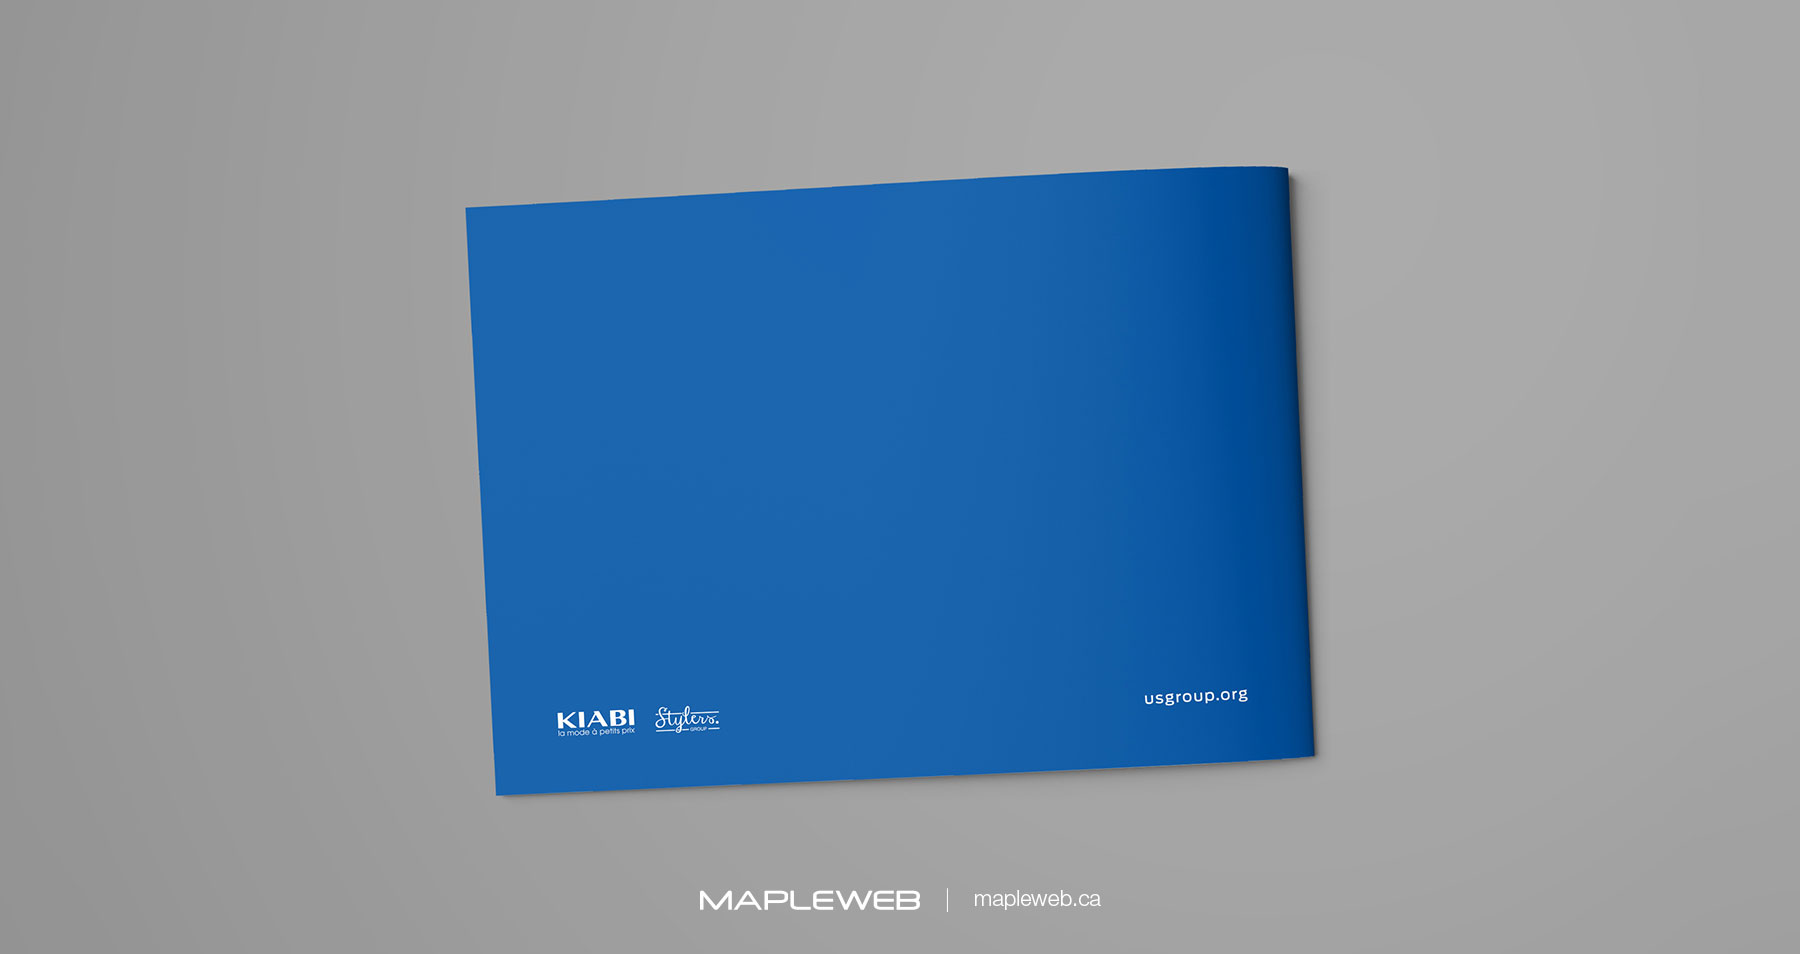 Stylers Brand design by Mapleweb White Logos on Blue Magazine Page